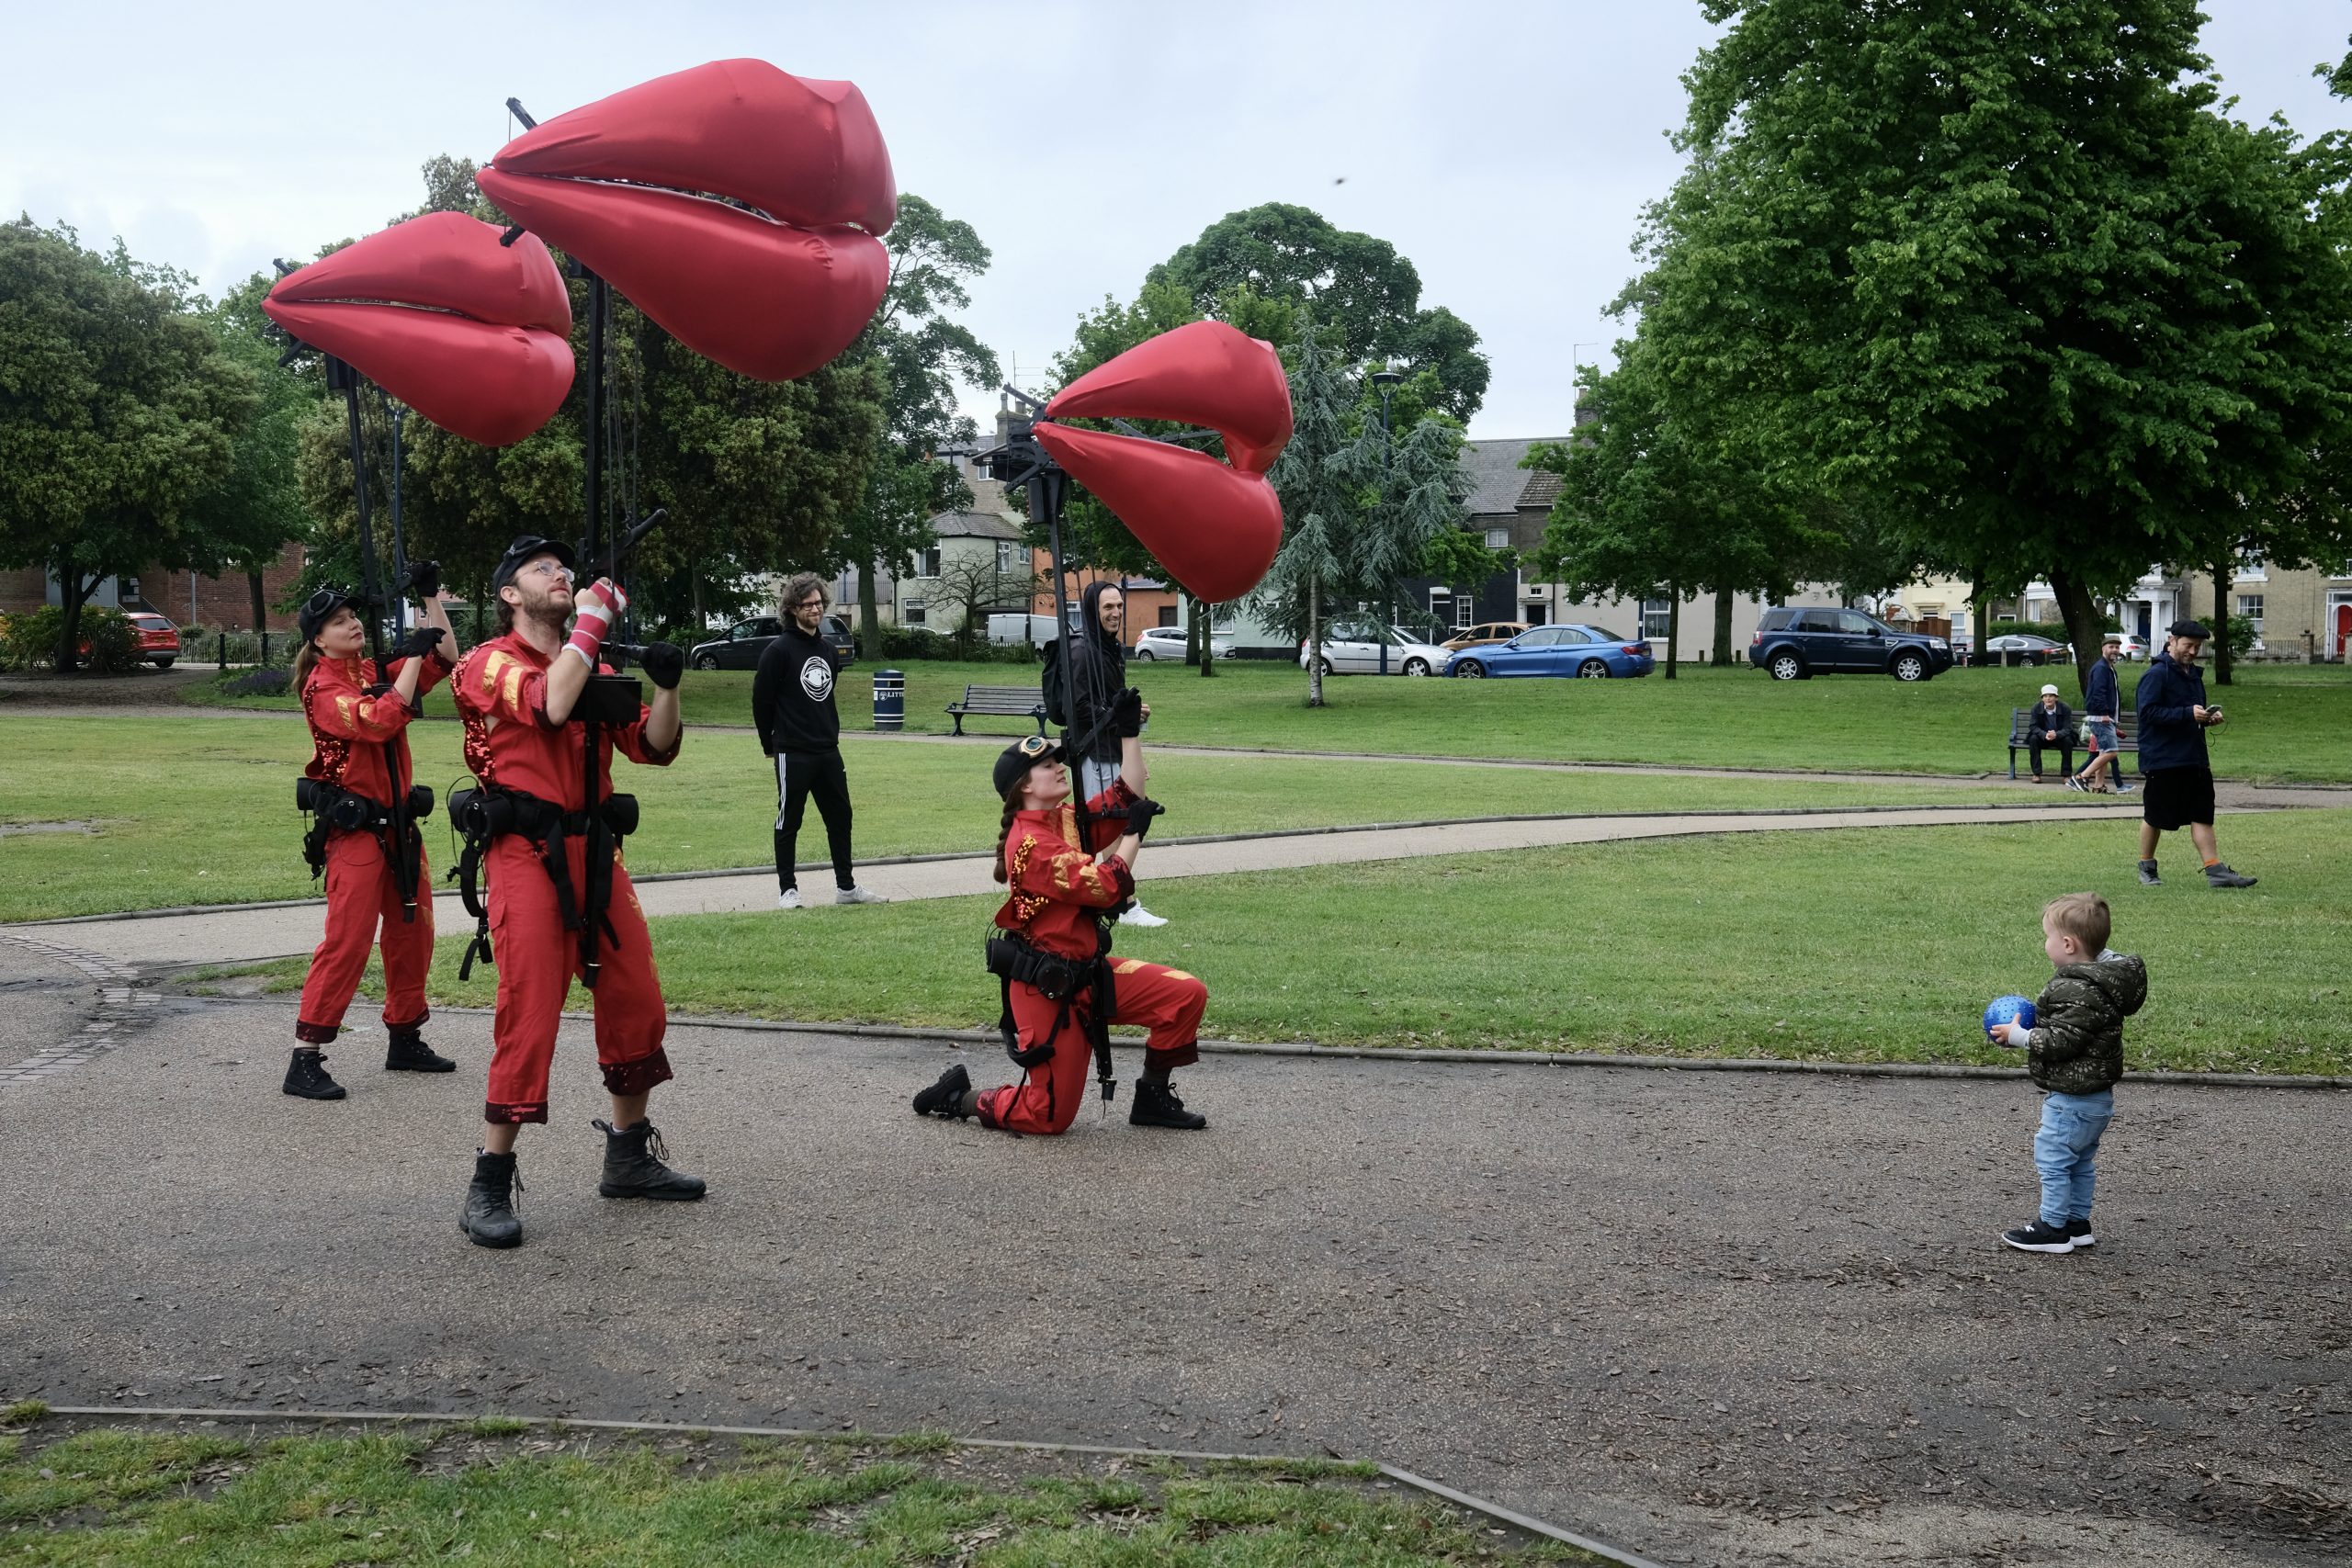 Three puppeteers with models of giant red pairs of lips, one kneeling, in front of a toddler in a park.